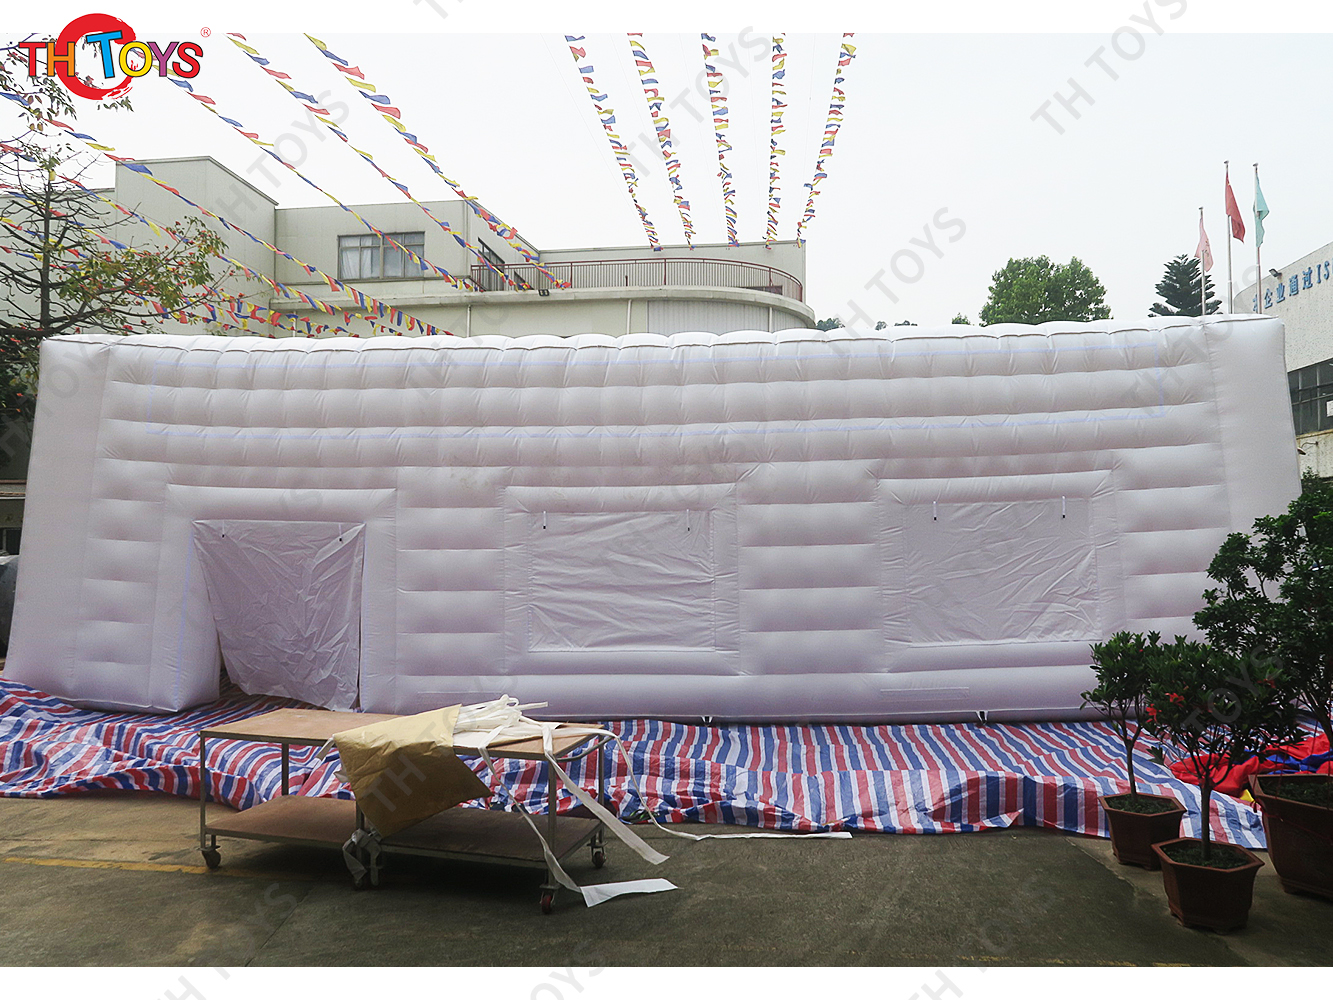 giant inflatable marquee party tent, outdoor white inflatable cube tent for sale